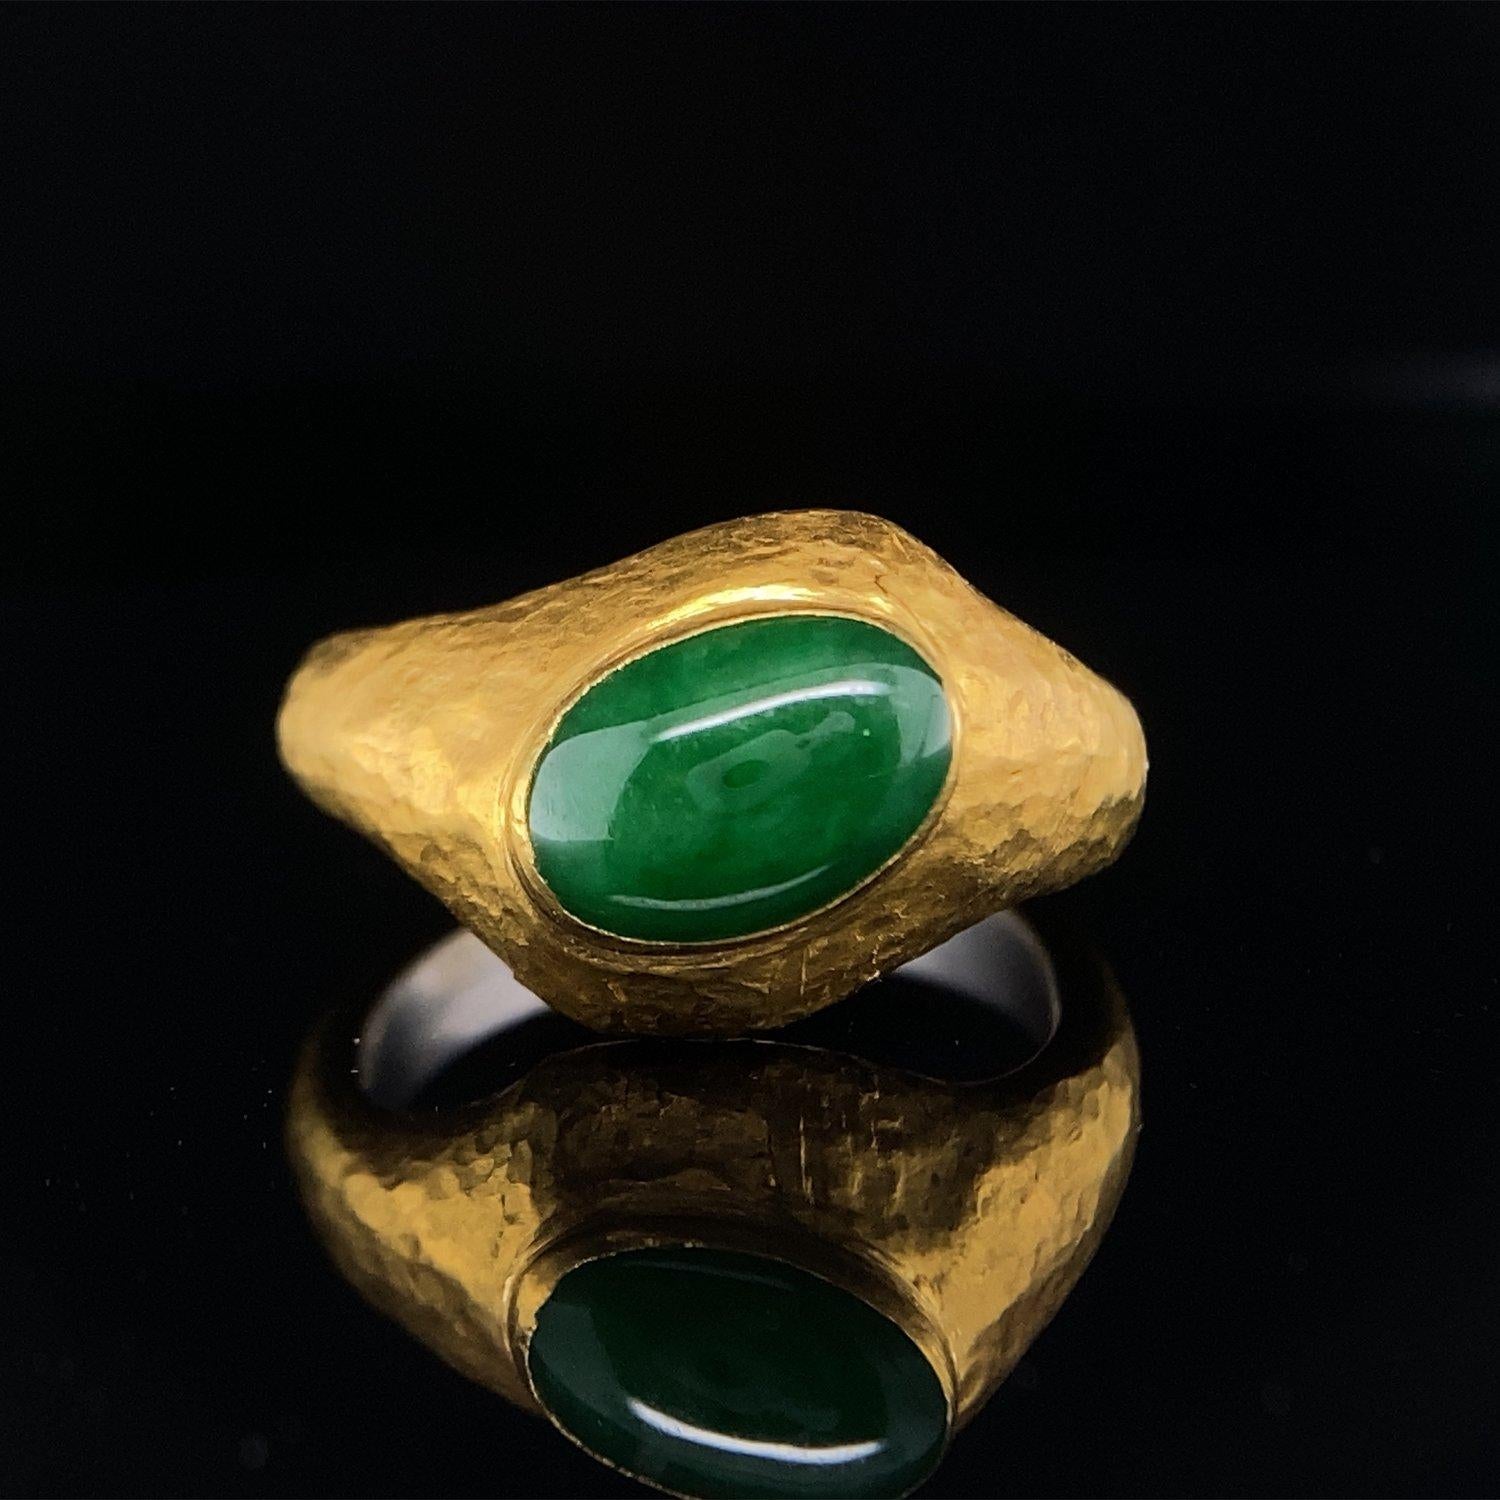 Size - 7, Oval Jade and 24K Gold Statement, Cocktail Ring, Handmade by Prehistoric Works of Istanbul, Turkey

Jade is a symbol of serenity and purity. It signifies wisdom gathered in tranquility. It increases love and nurturing. A protective stone,